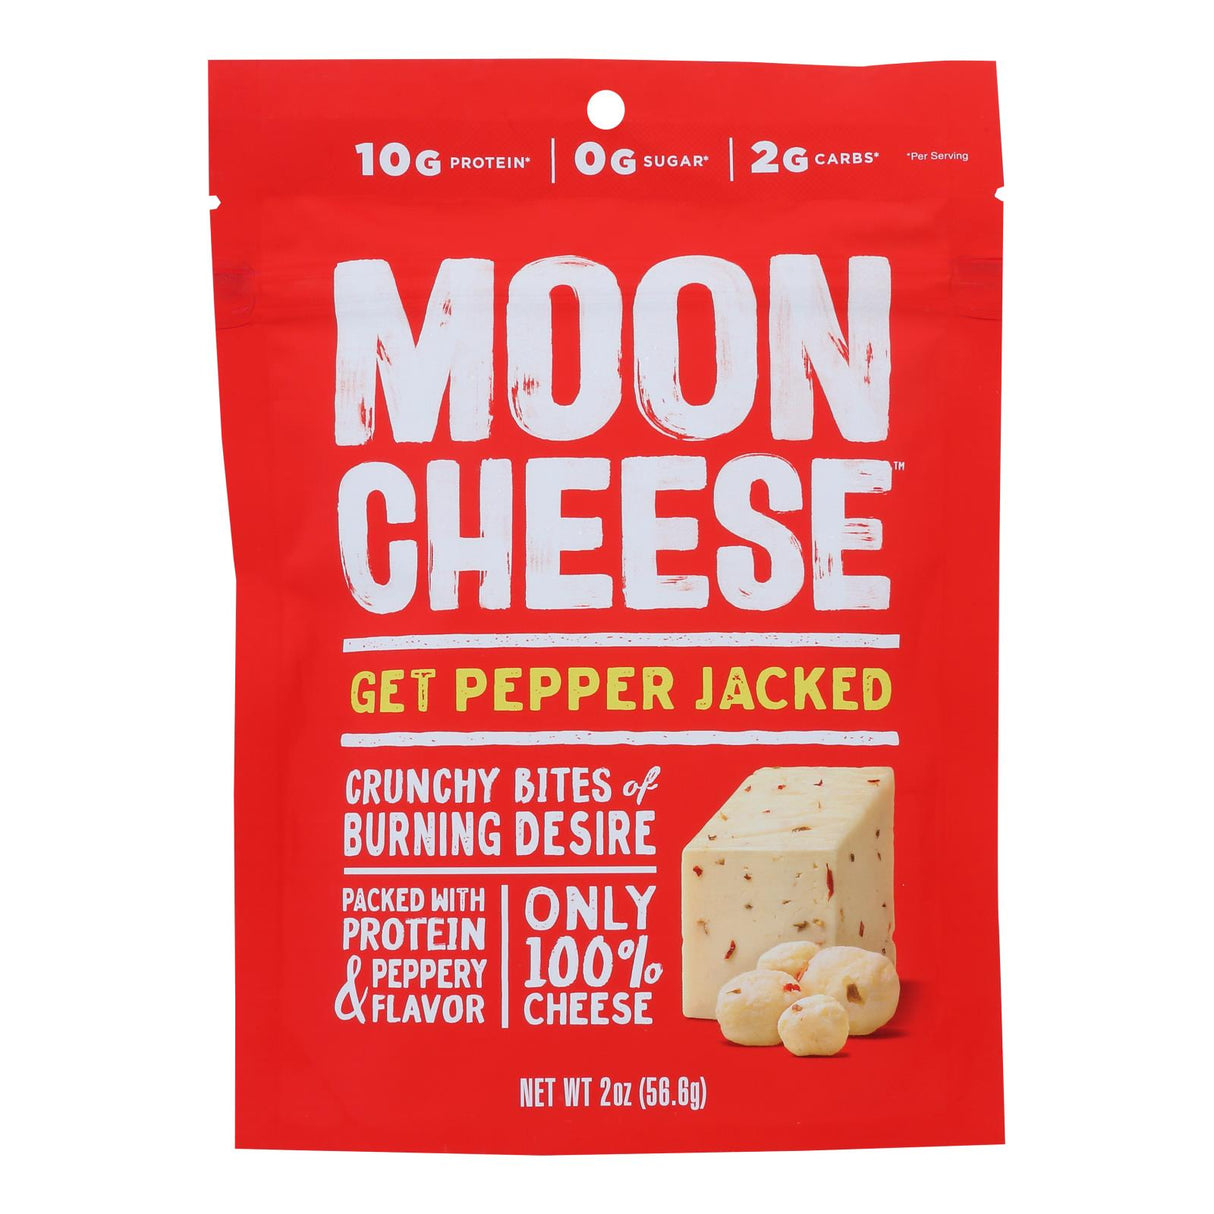 Moon Cheese Pepper Jack Naturally Dehydrated Cheese Snack, 2 Oz (Pack of 12) - Cozy Farm 